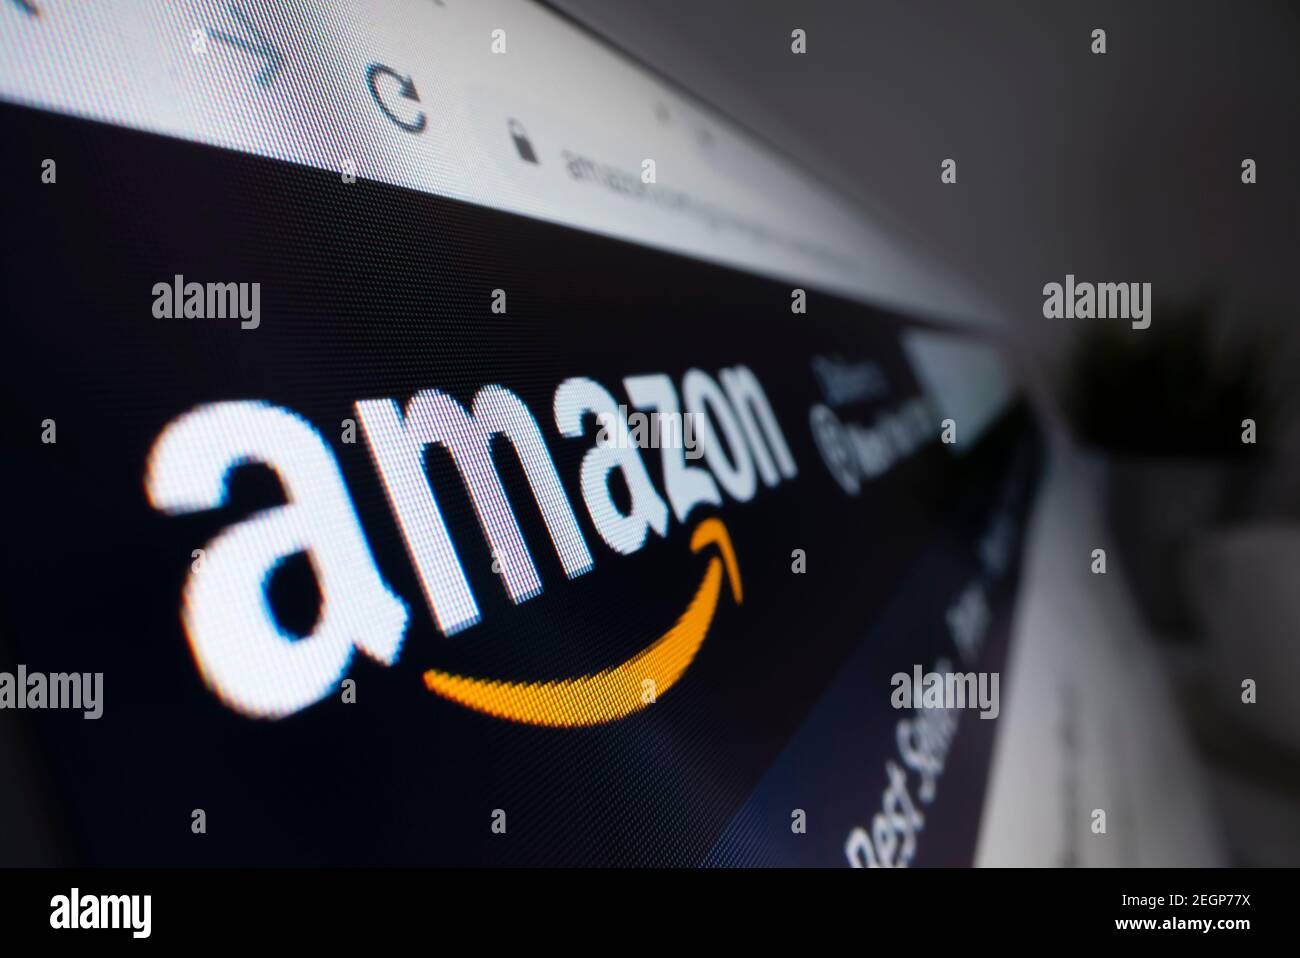 Close-up view of Amazon logo on its website Stock Photo